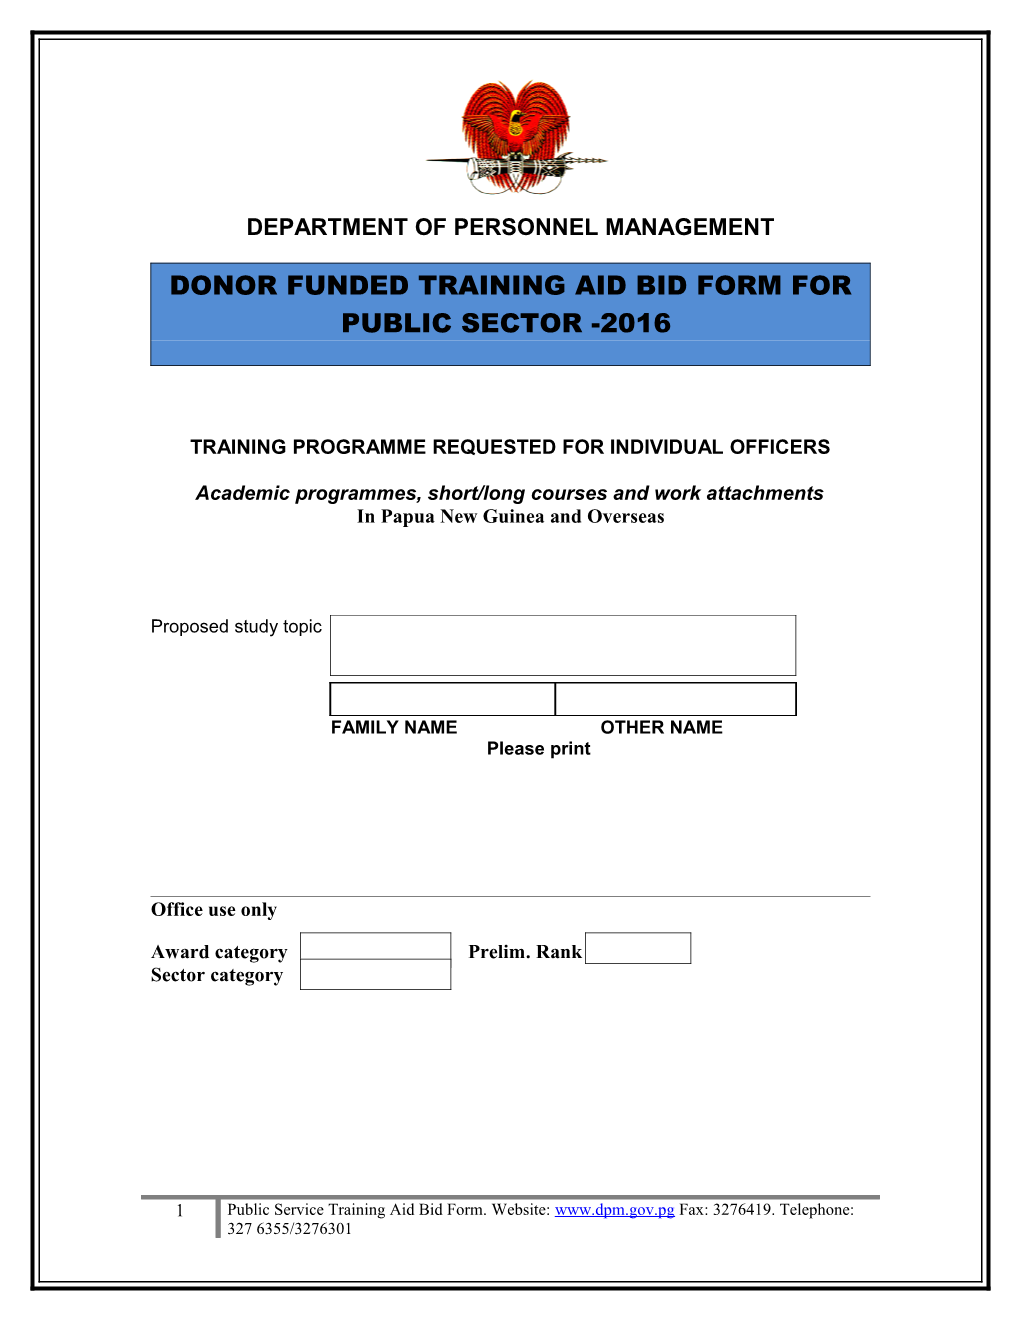 Donor Funded Training Aid Bid Form for Public Sector -2016